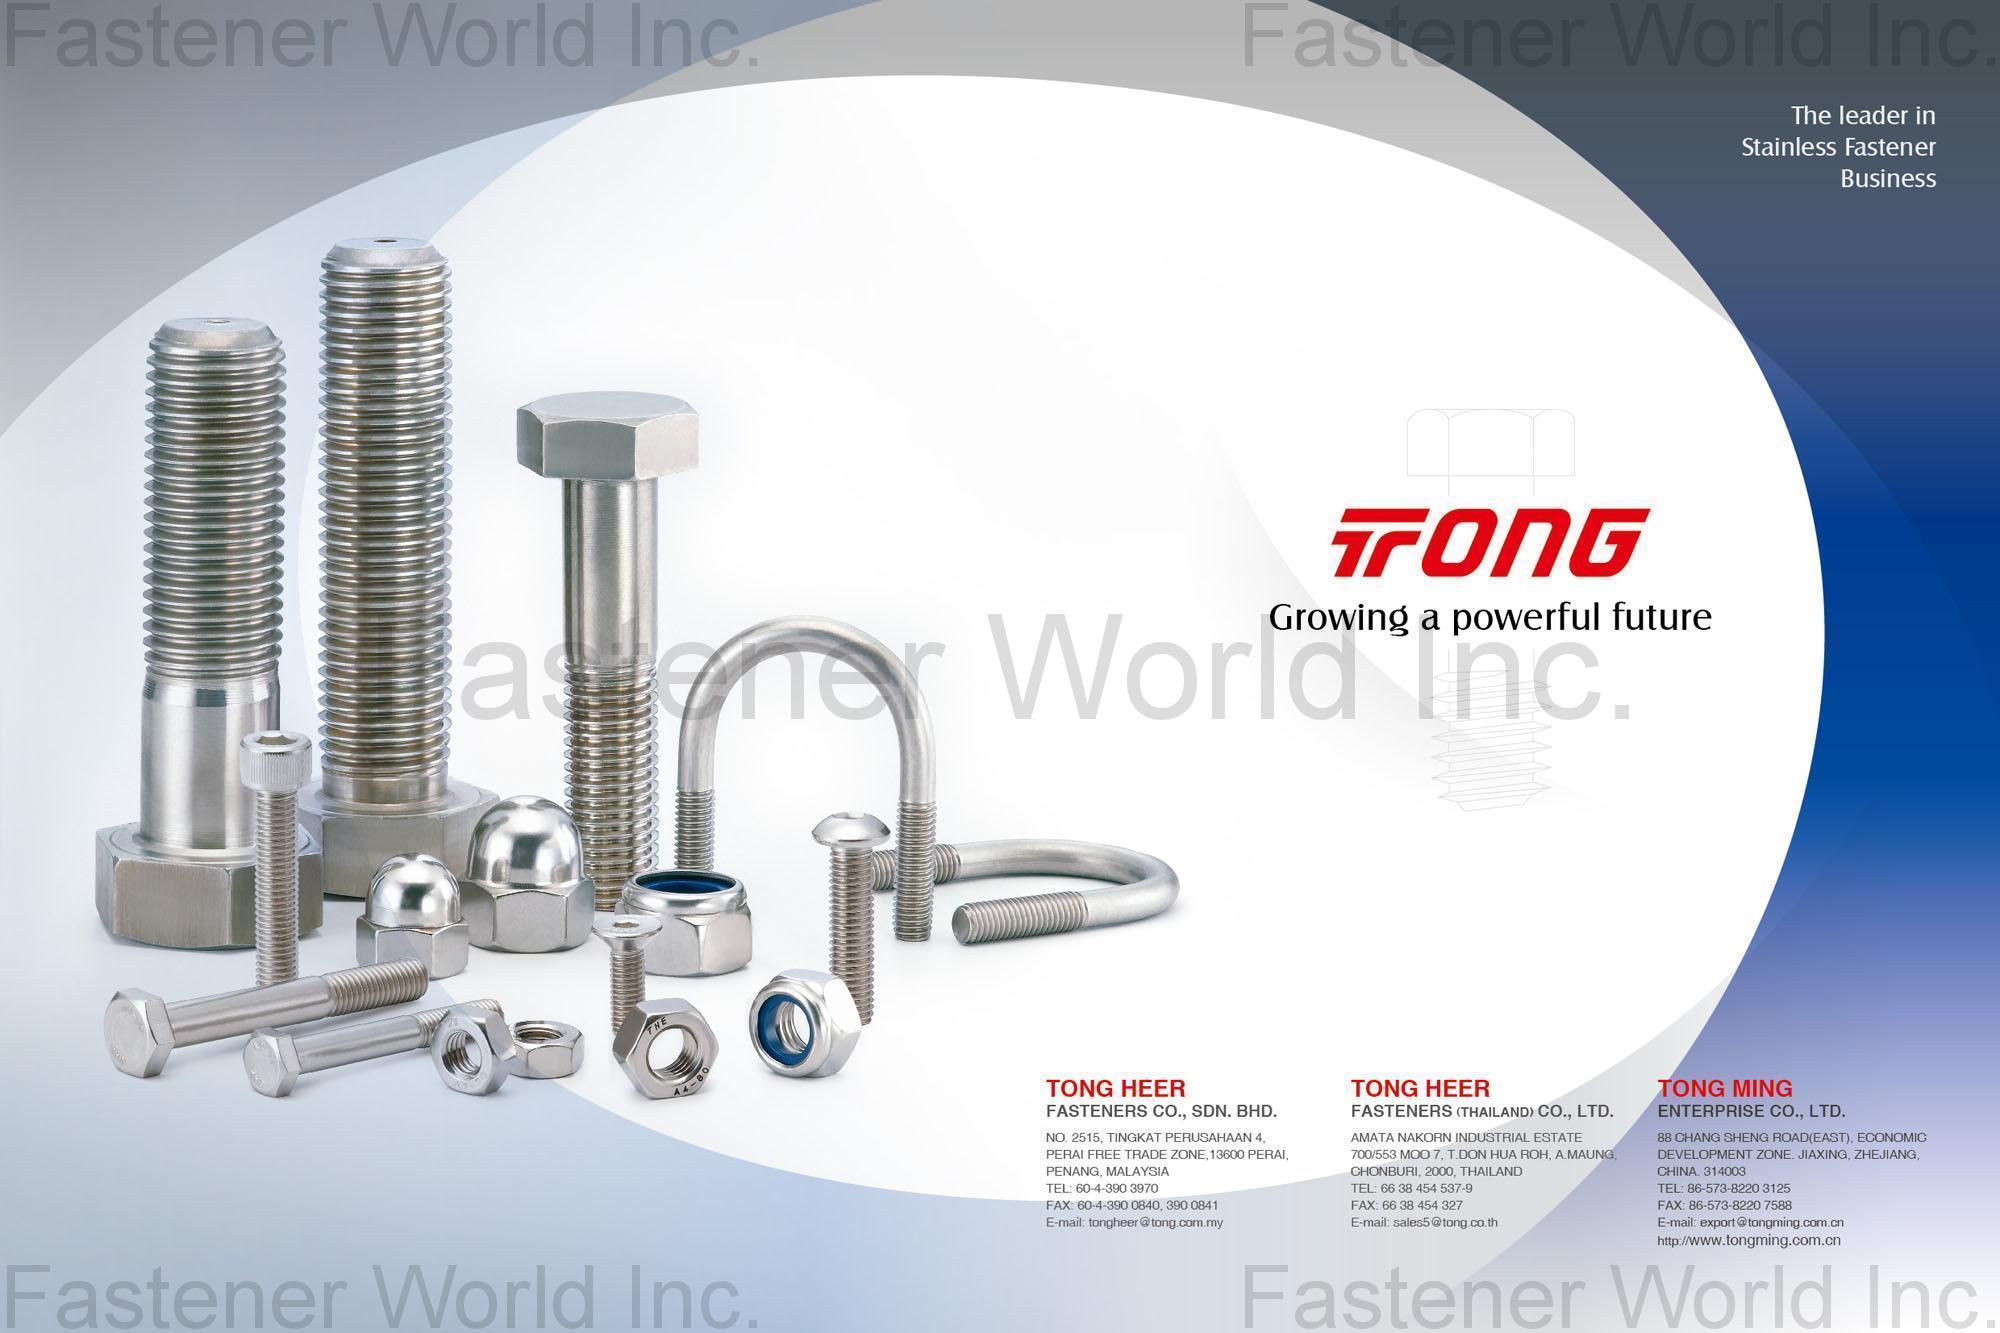 TONG HEER FASTENERS (THAILAND) CO., LTD. , Stainless Steel Fasteners, Hex Head Cap Screws, Socket Head Cap Screws, Sems Bolts, Carriage Bolts, Washers, Threaded Rods & Studs, Screw Cold Wire